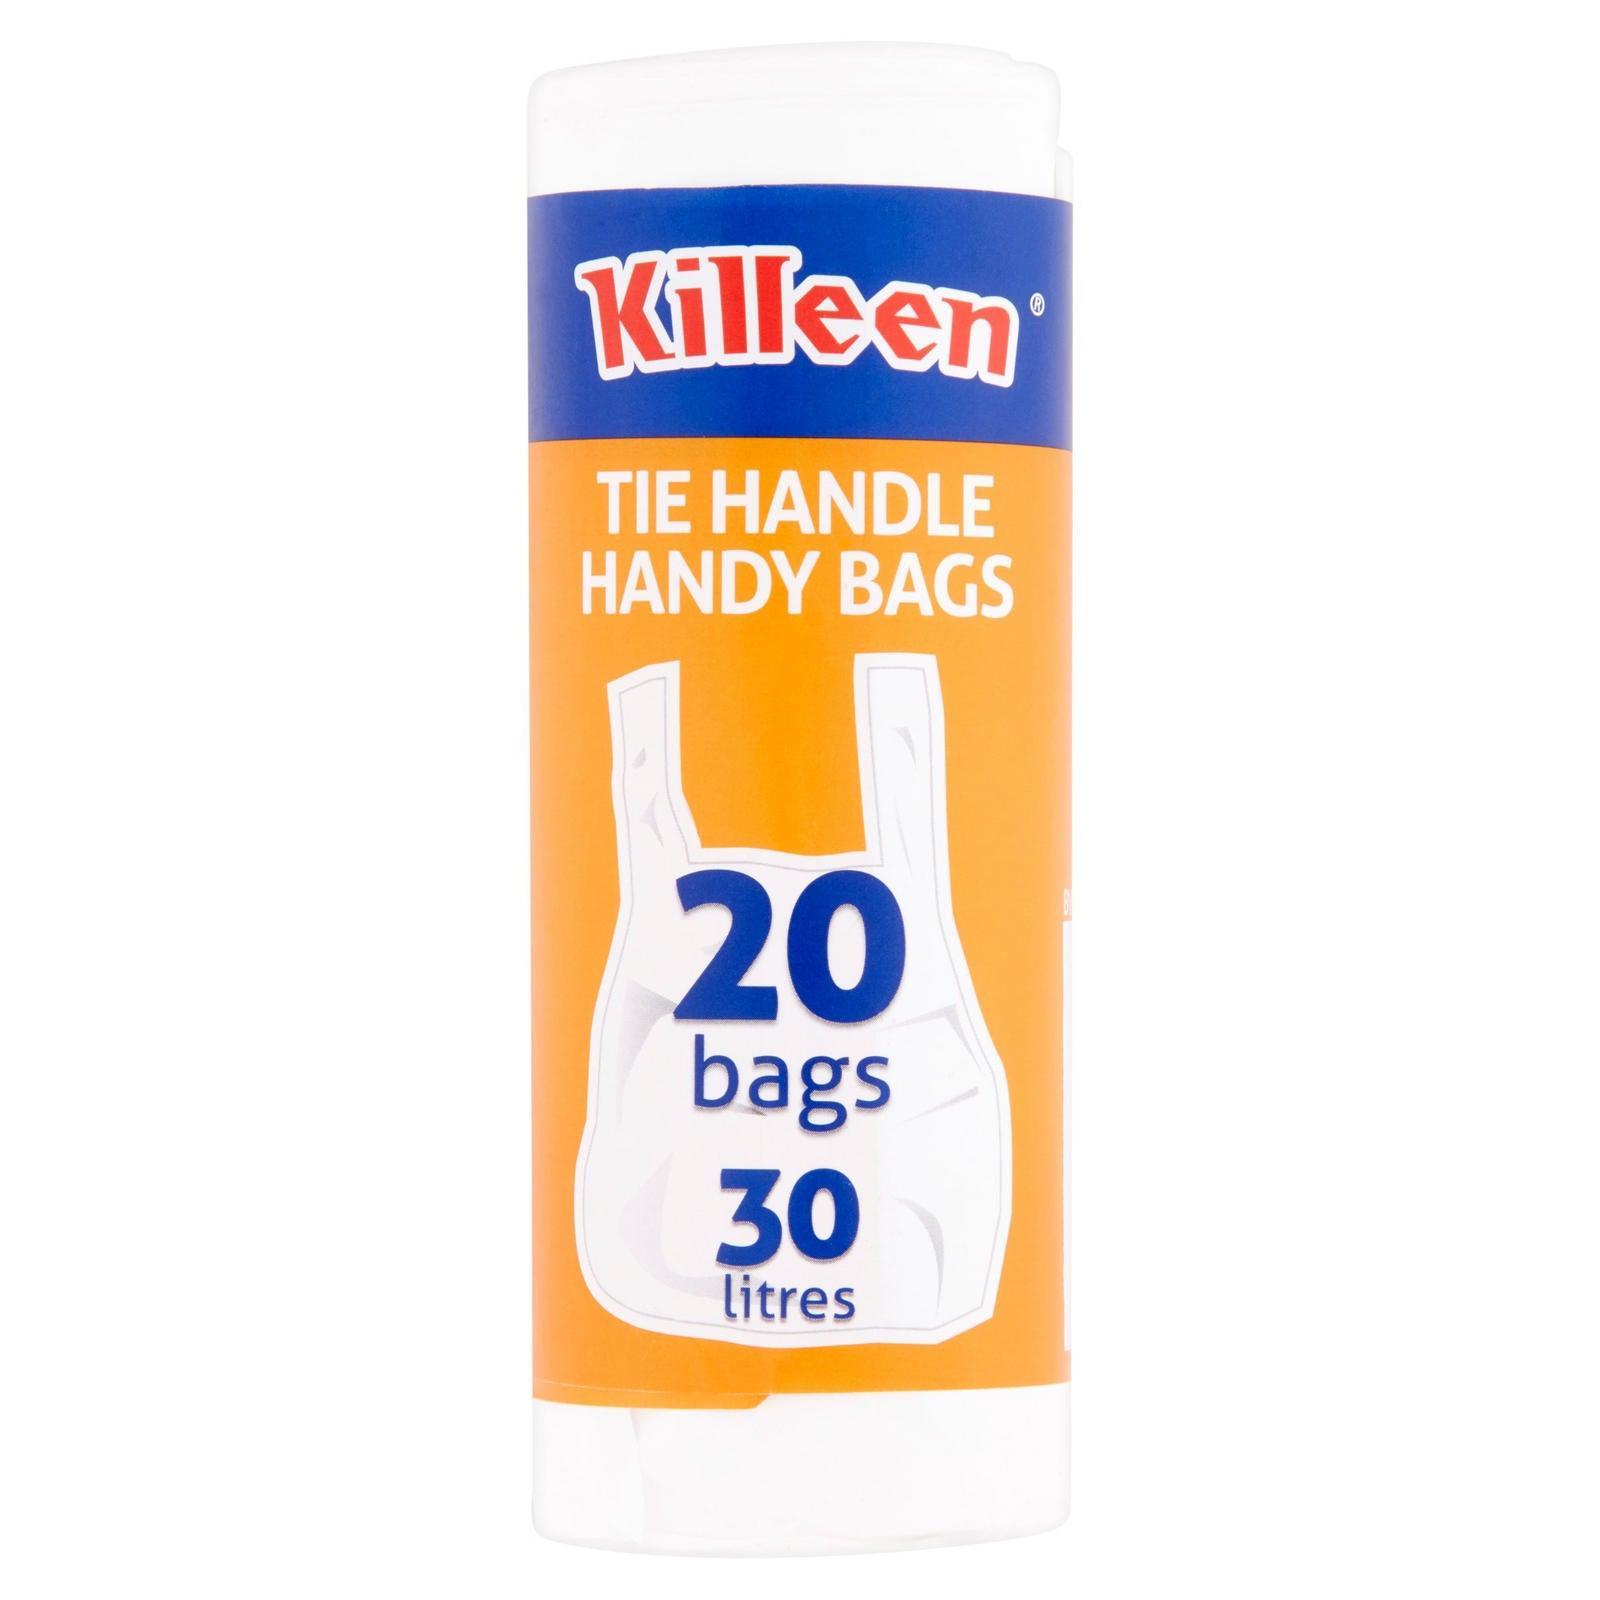 Killeen 20 pack tie handle Handy Bags with 30 litre capacity - Choice Stores